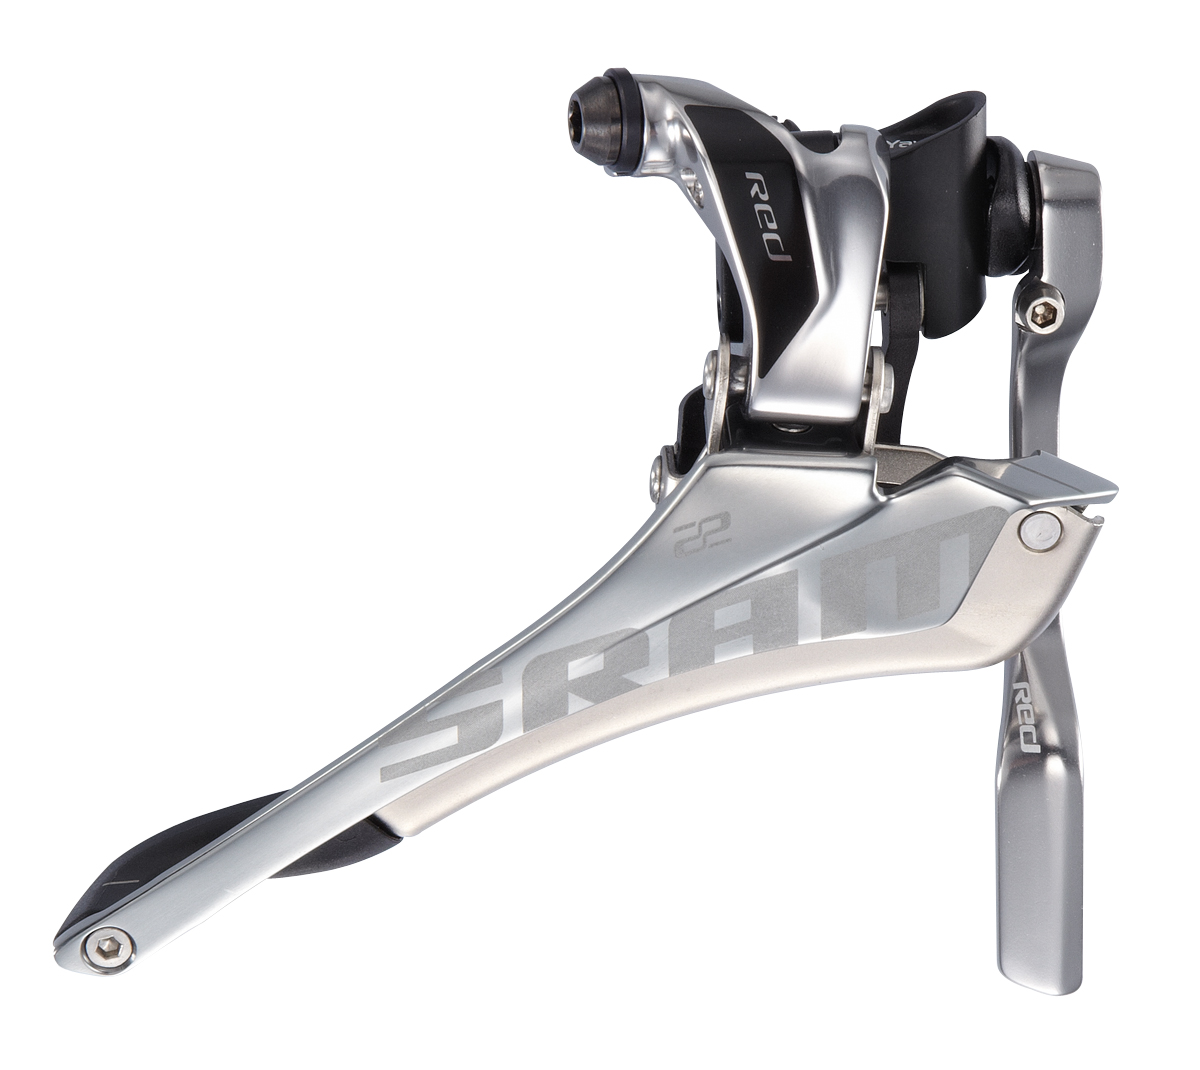 SRAM Red 22 Front Derailleur Bronze with Chain Spotter C2 V4.3 by SRAM